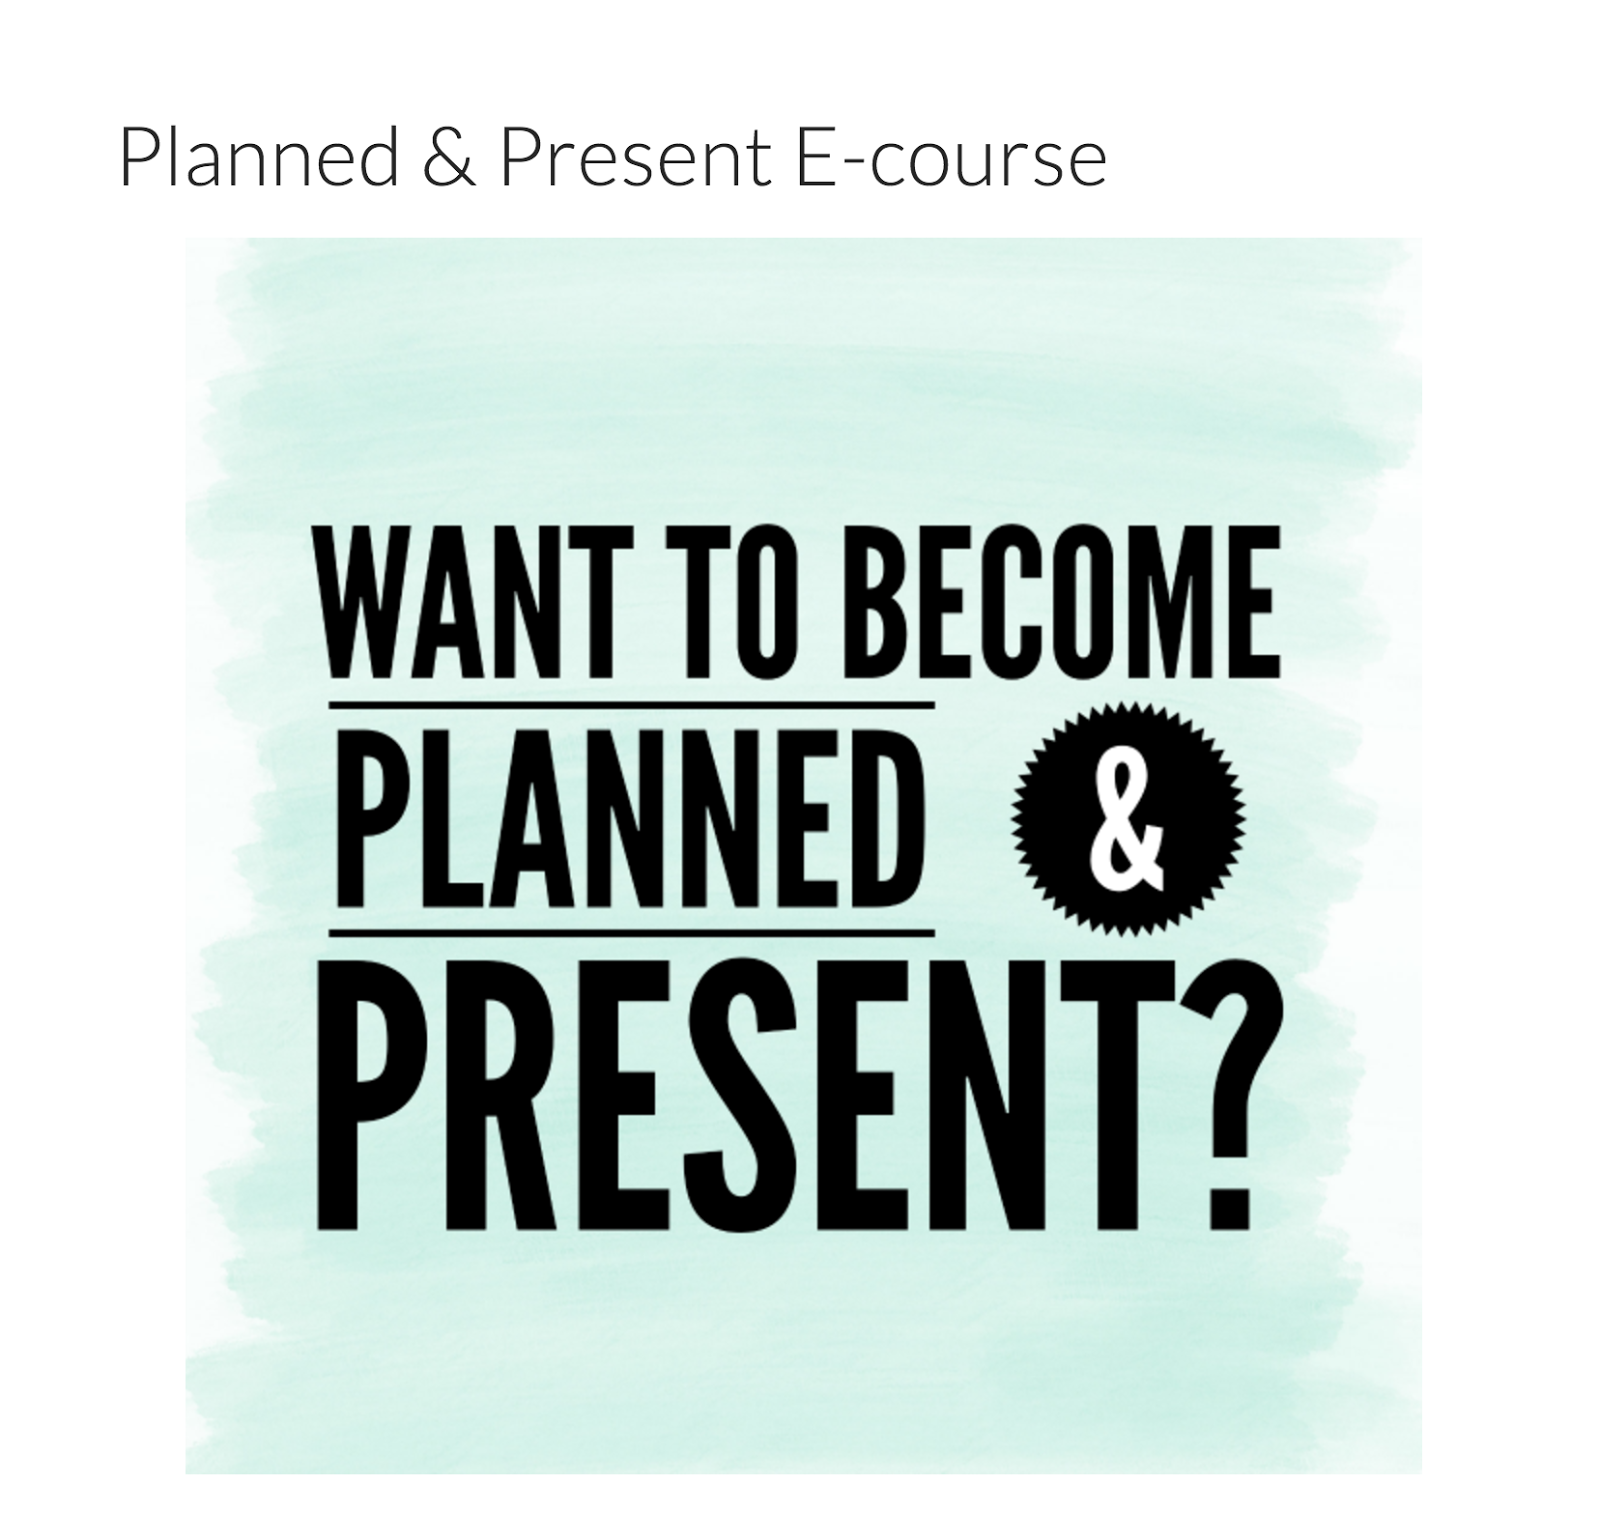 planned and present ecourse.png